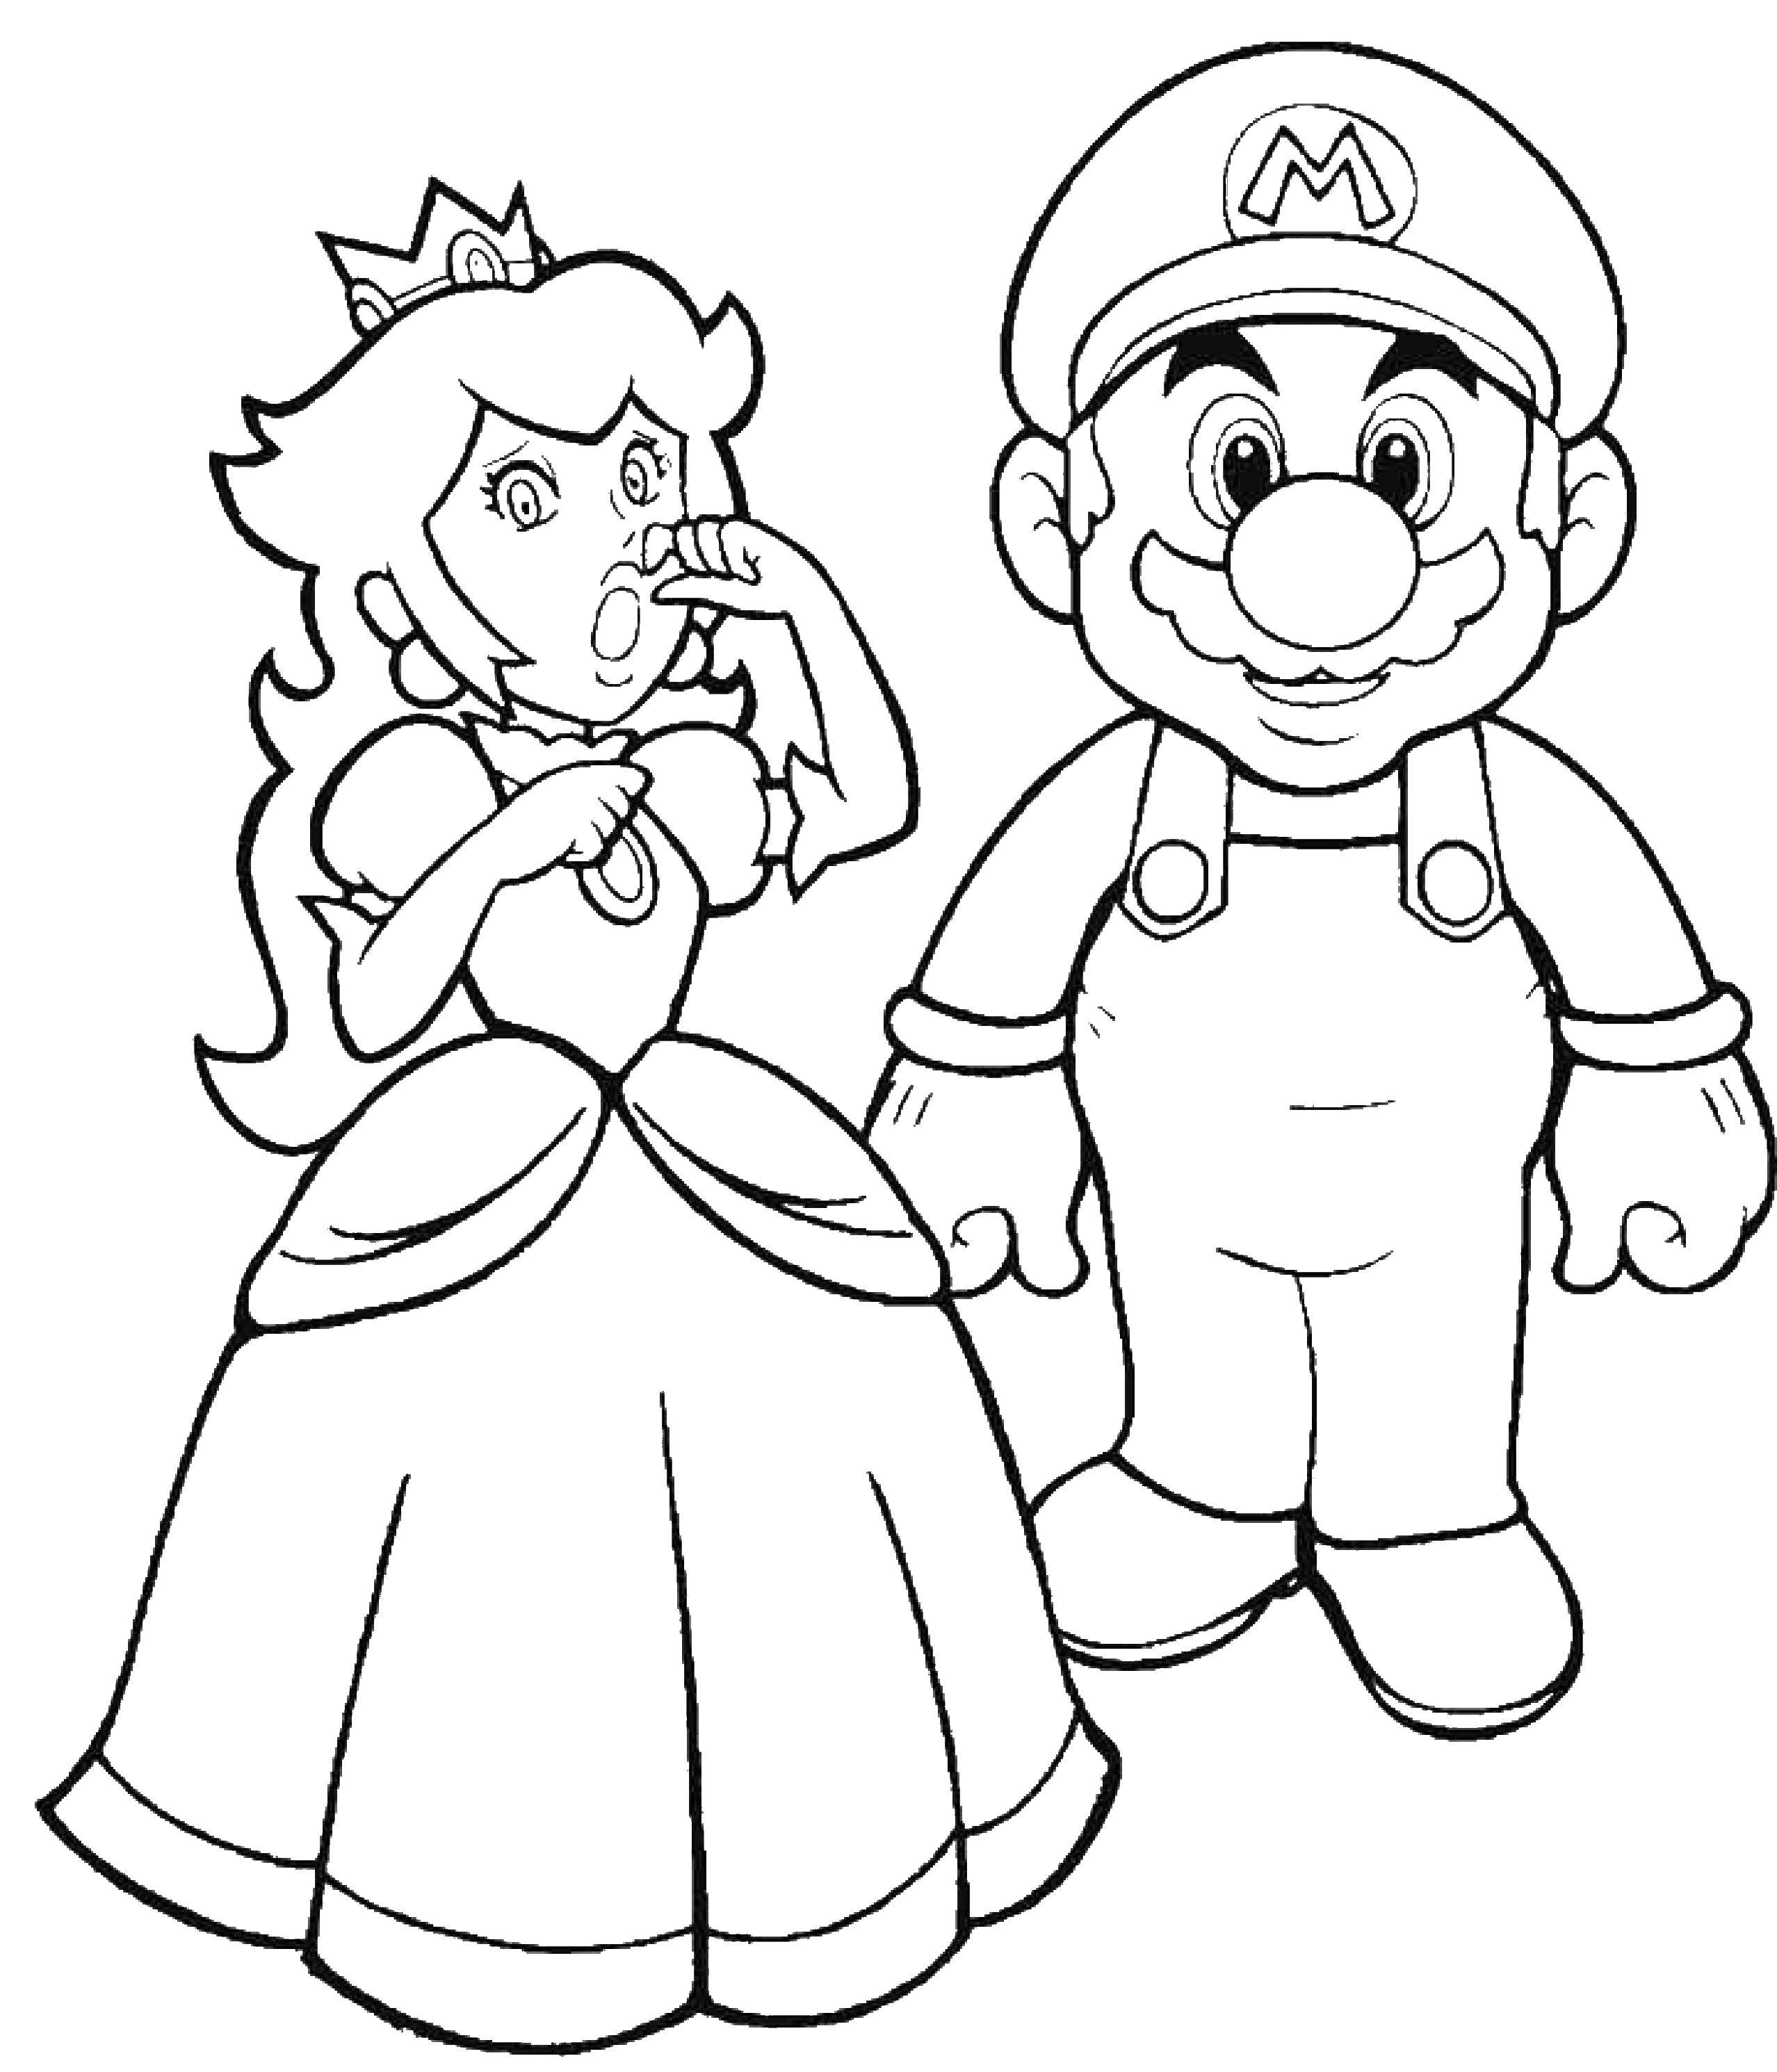 Coloring Super Mario and Princess. Category The character from the game. Tags:  super Mario, Princess.